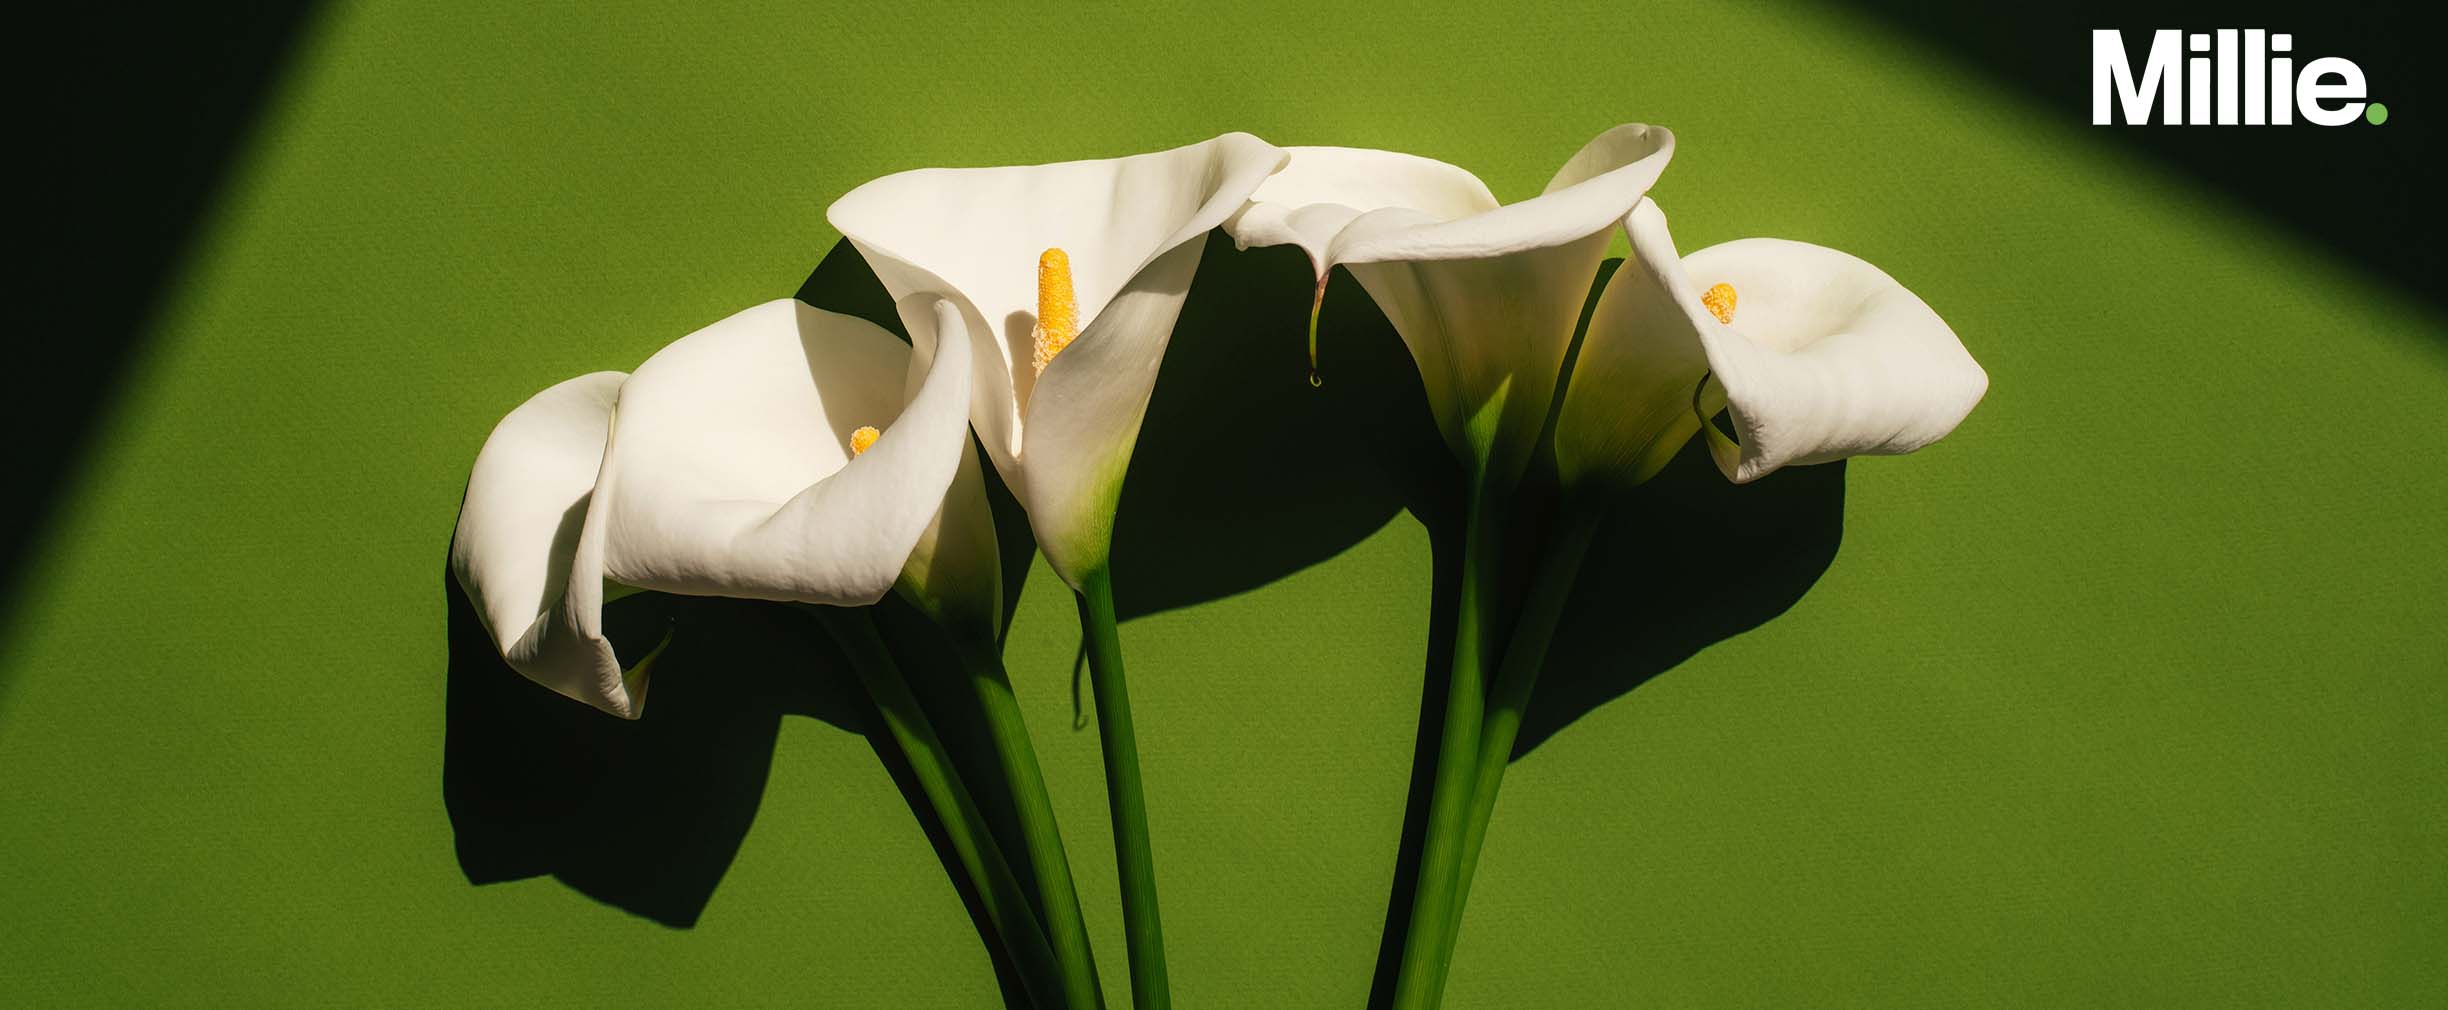 Five white lilies on a plain green background.